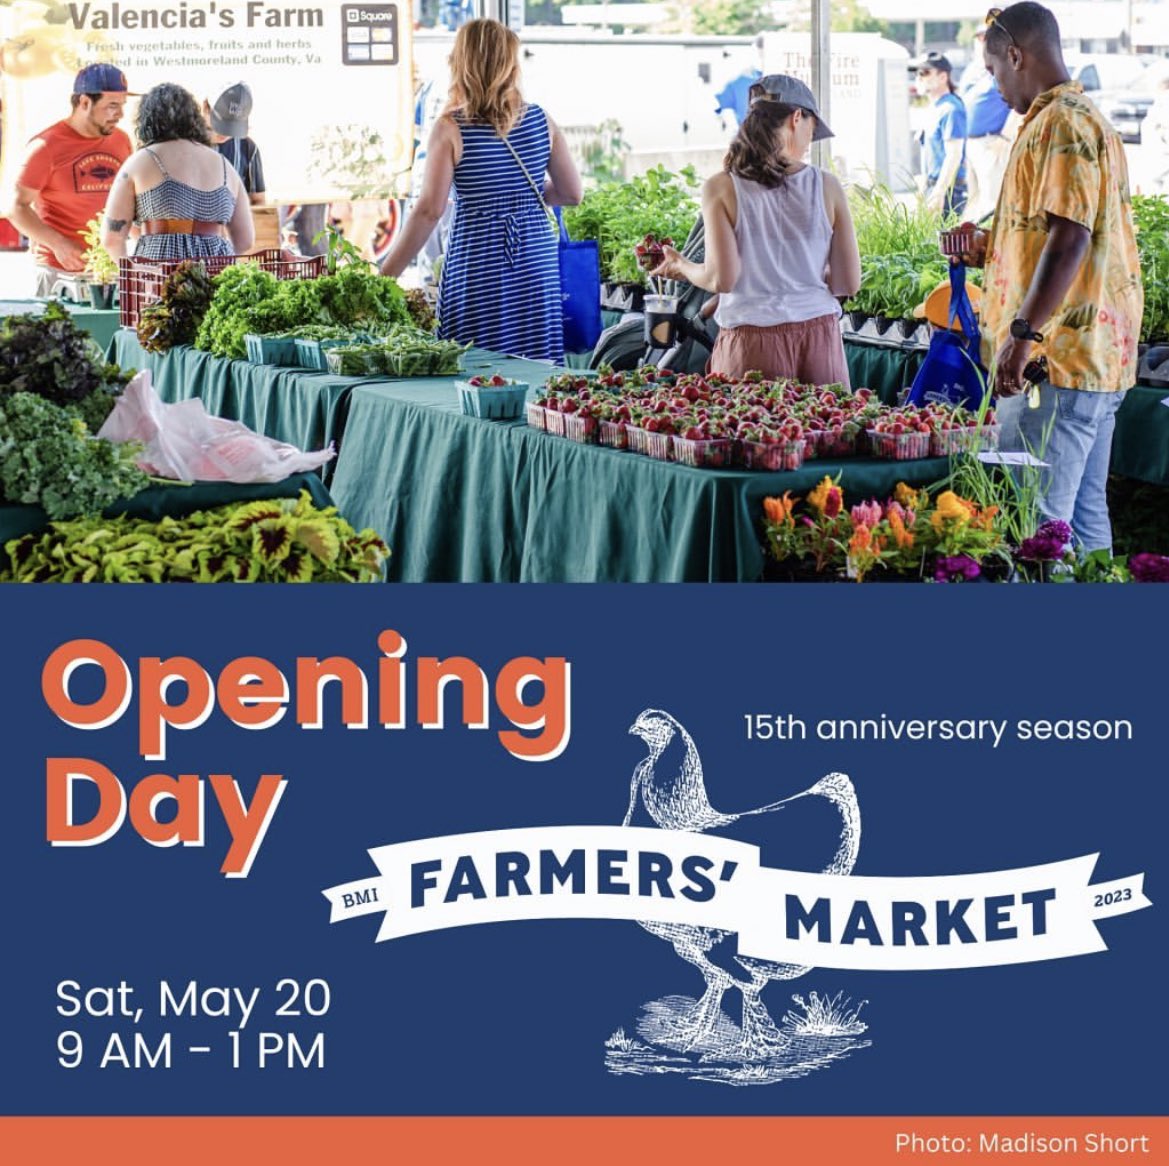 Kick off the 15th anniversary season of the BMI Farmers’ Market THIS Saturday from 9am-1pm. 

Enjoy live music, a hatmaking activity for kids of all ages with Tattered Hatters, and a tote bag giveaway for the first 500 shoppers!

#BMoreLocal #ShopLocal